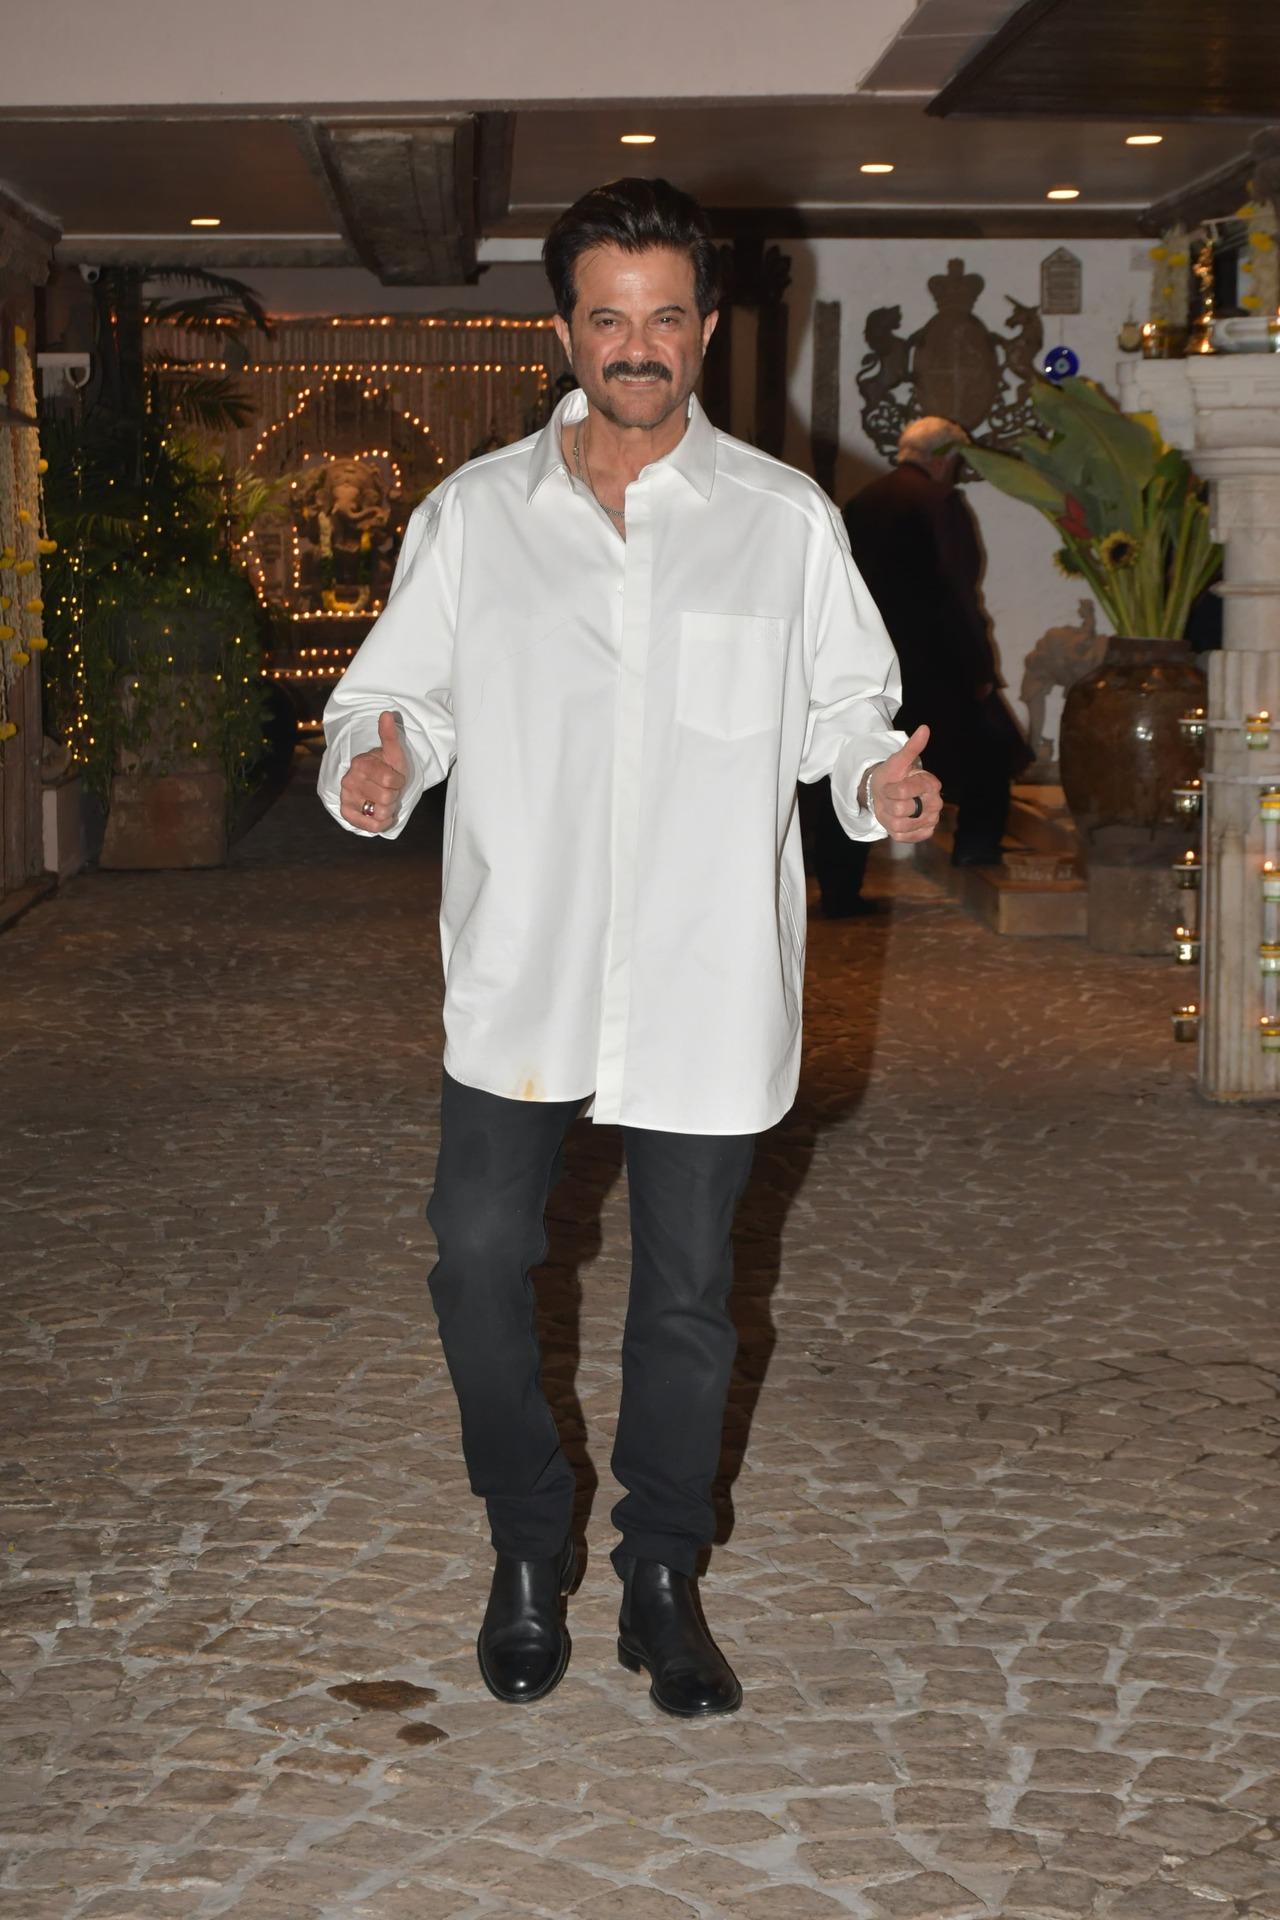 Host Anil Kapoor looked stylish in an oversized white shirt and black pants for the party he hosted at his Juhu home